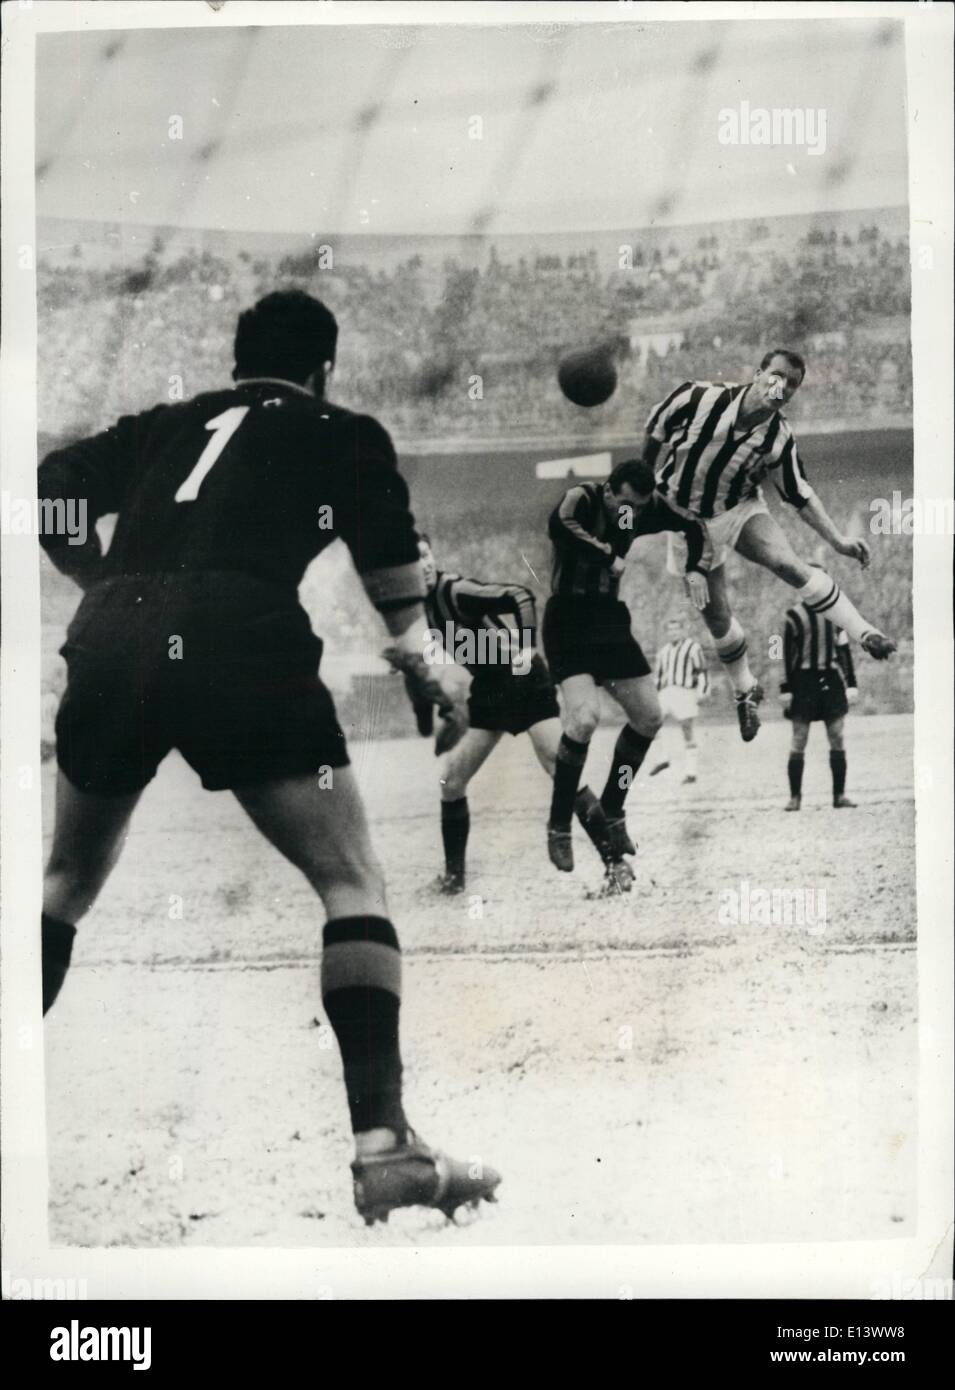 Mar. 27, 2012 - John Charles Scores Vital Goal - ''Juventus'' Beats International Milan. A huge crowd attended the log awaited match between 'Juventus' Turin and ''Internationale'' Milan - in Milan. The match ended in a win for ''Juventus' - the first goal of the match being scored by John Charles. Photo shows: The incident as Cardarelli and Fongaro of the ''Inter'' team tackle John Charles - but cannot stop him from scoring the first goal. A split second later the ball entered the net. Stock Photo